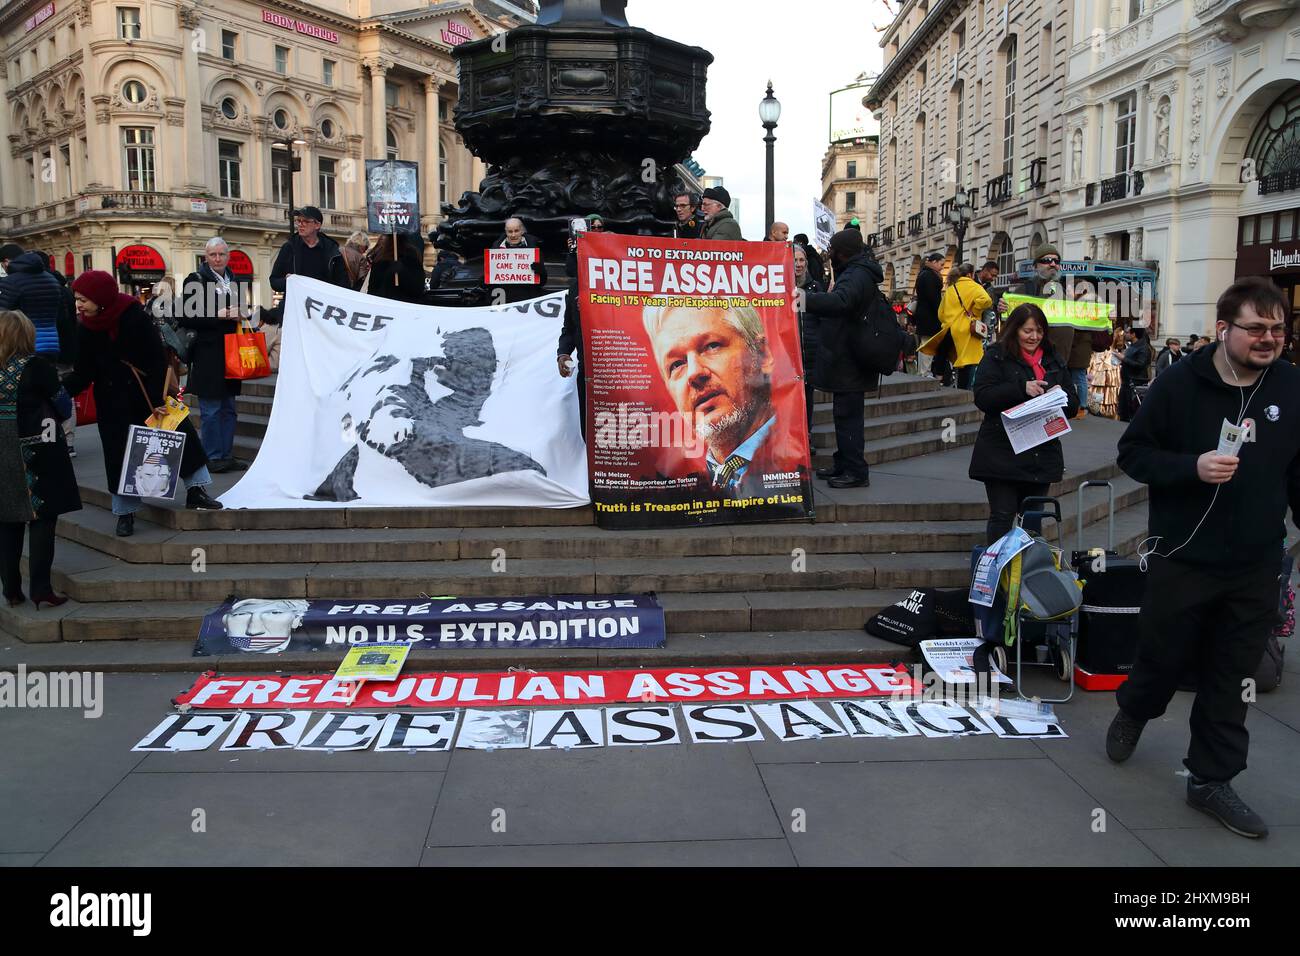 A small group of demonstrators holding placards campaign to free Julian Assange from prison at Piccadilly Circus, London, UK Stock Photo